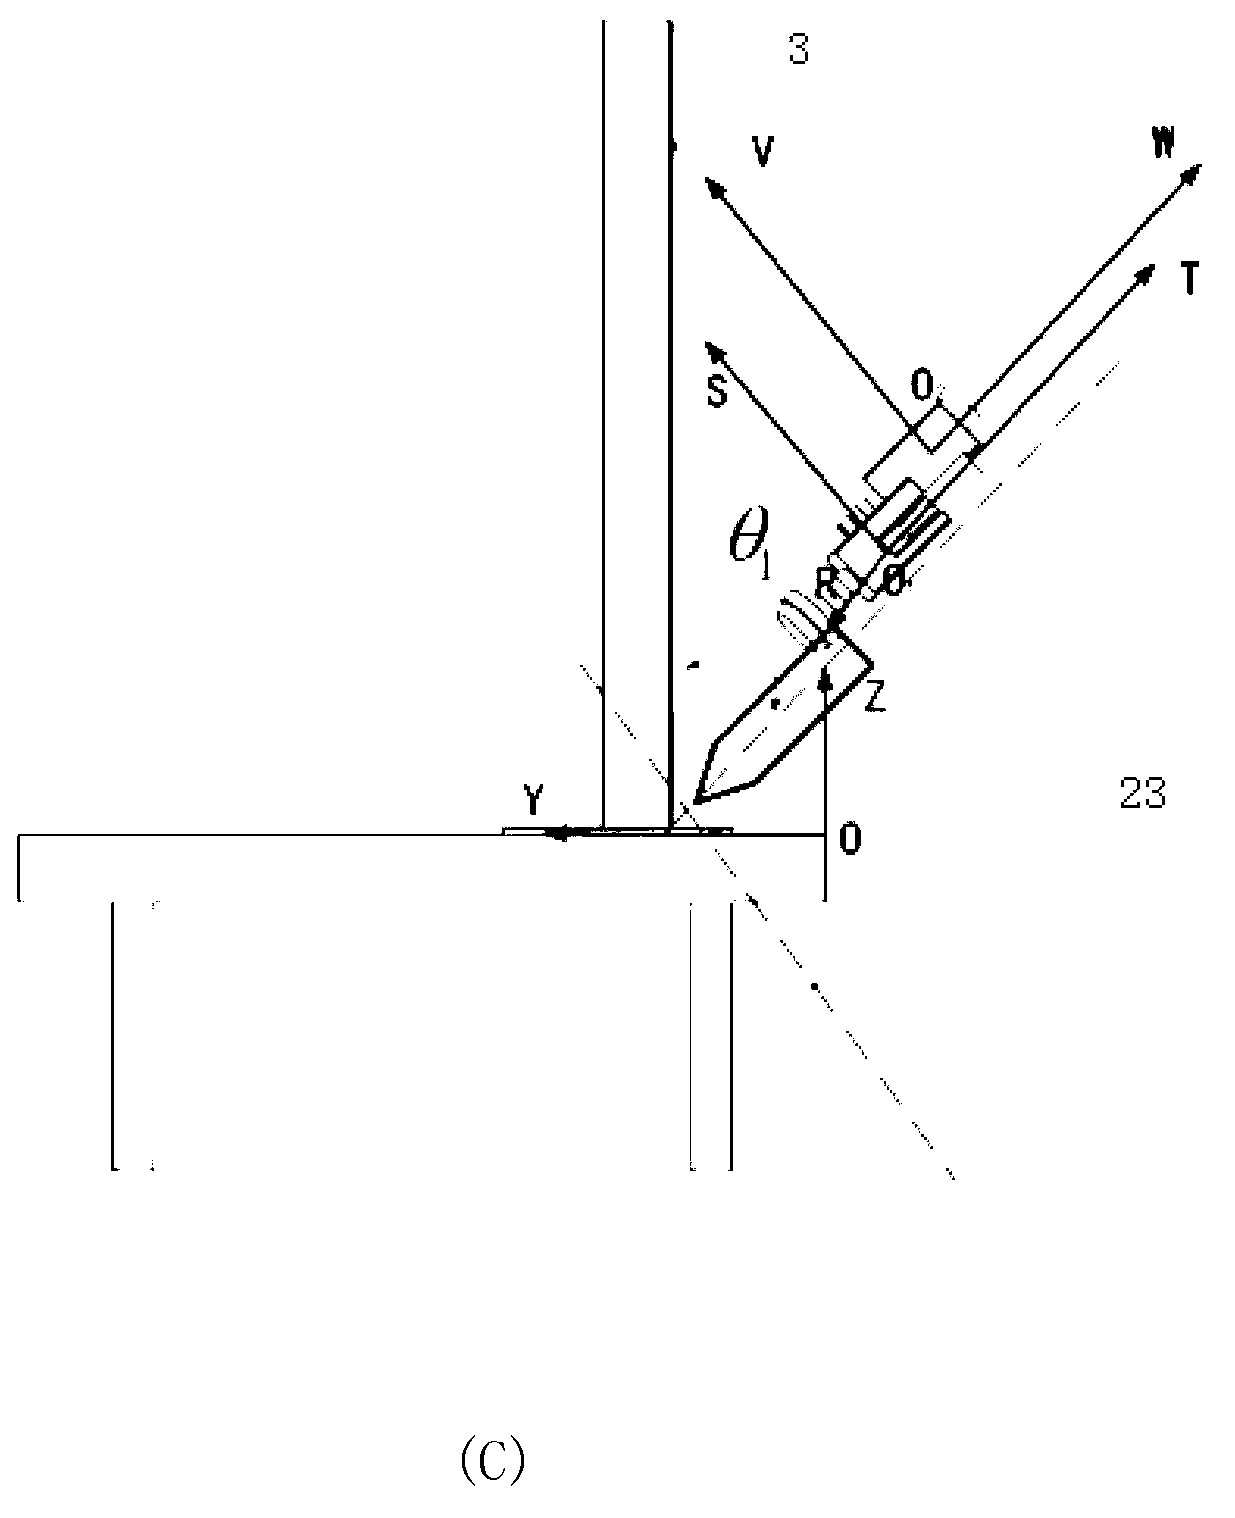 Visual tracking monitoring system and method in automatic corrugated thin plate fillet weld welding